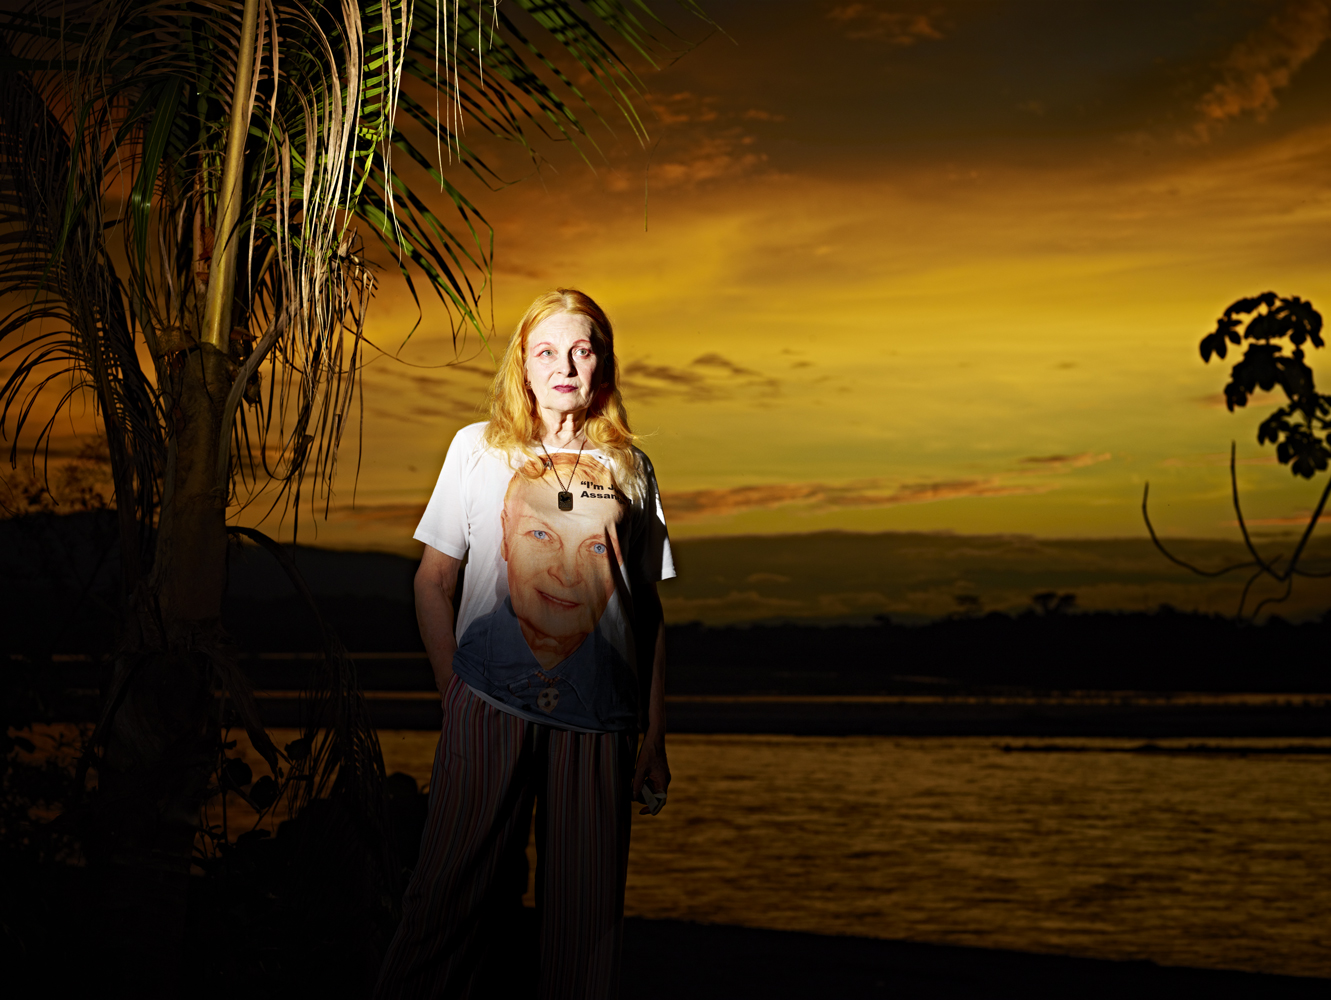 Vivienne Westwood stood before a sunset in the rainforest.